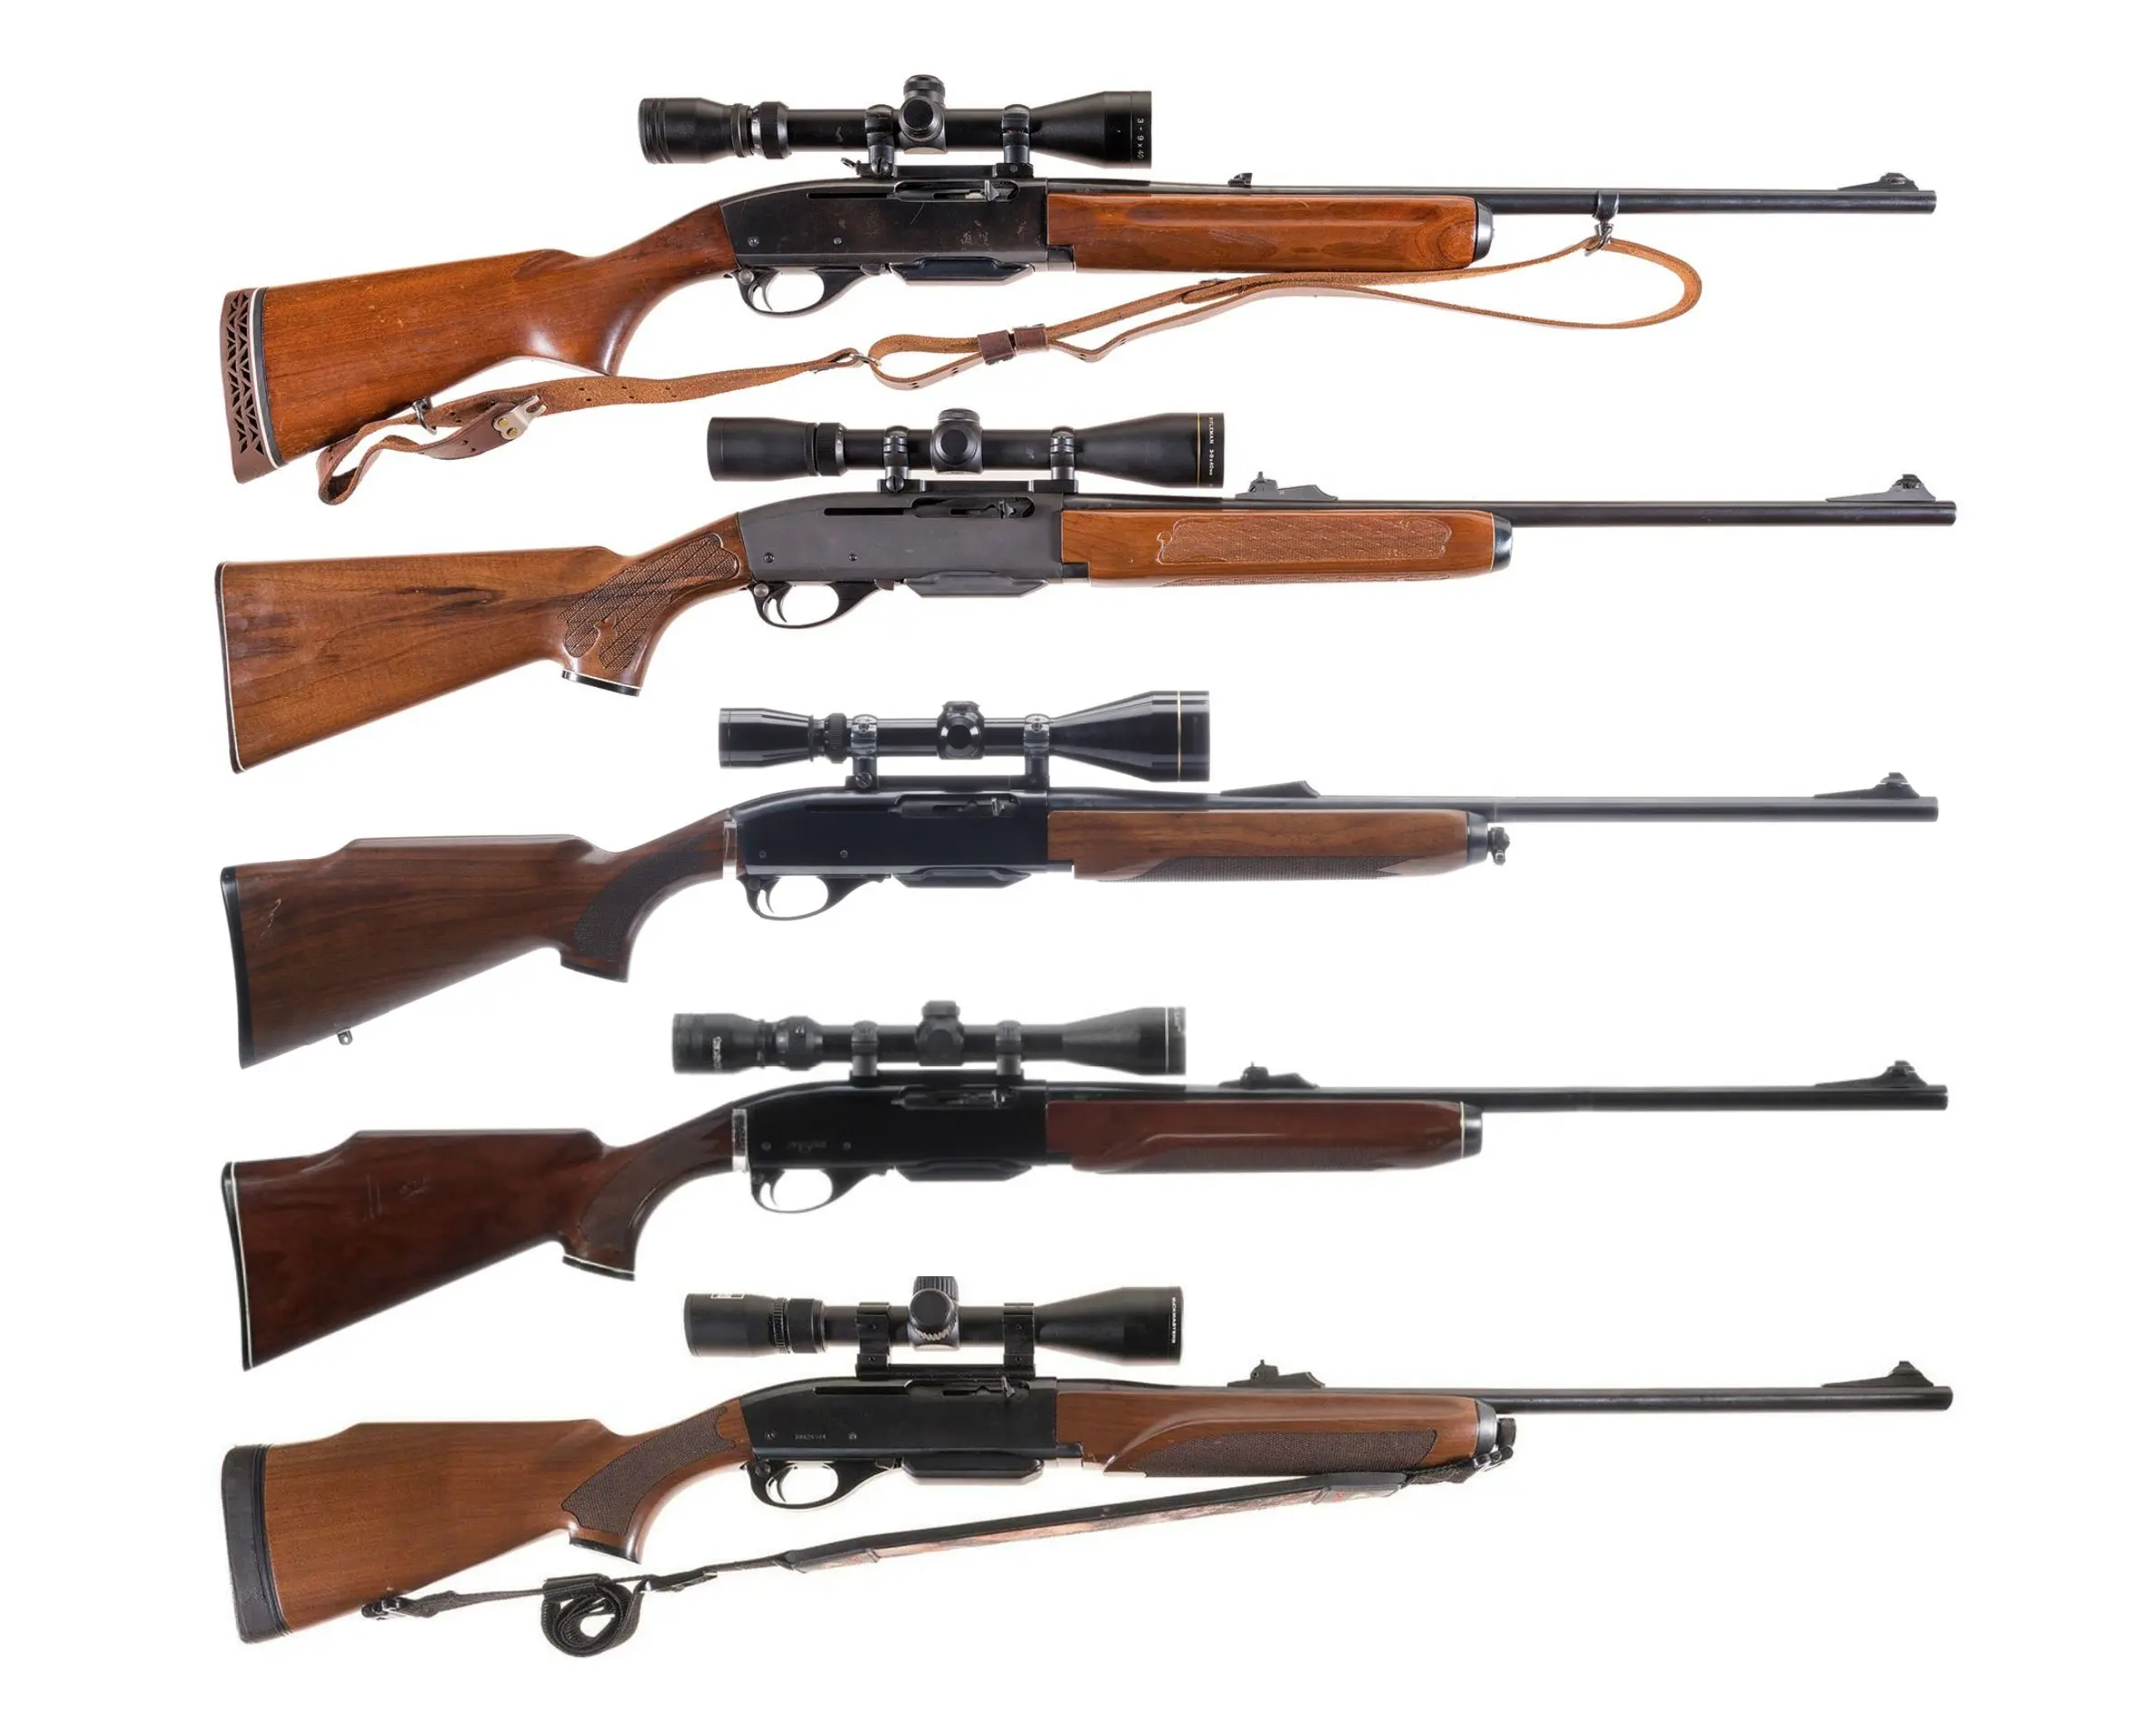 photo of Remington autoloading rifles, including the Model 742 second from top